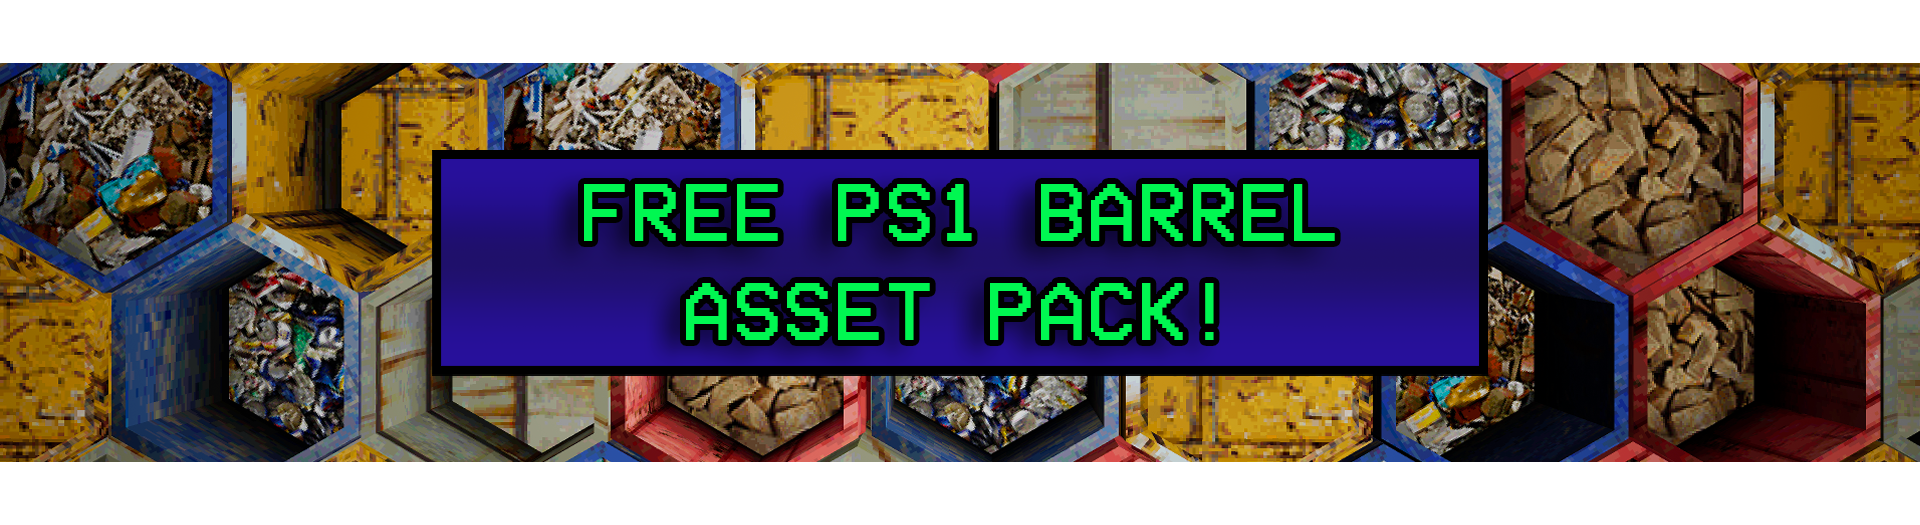 PSX PS1 Free Barrels Low Poly - Asset Pack